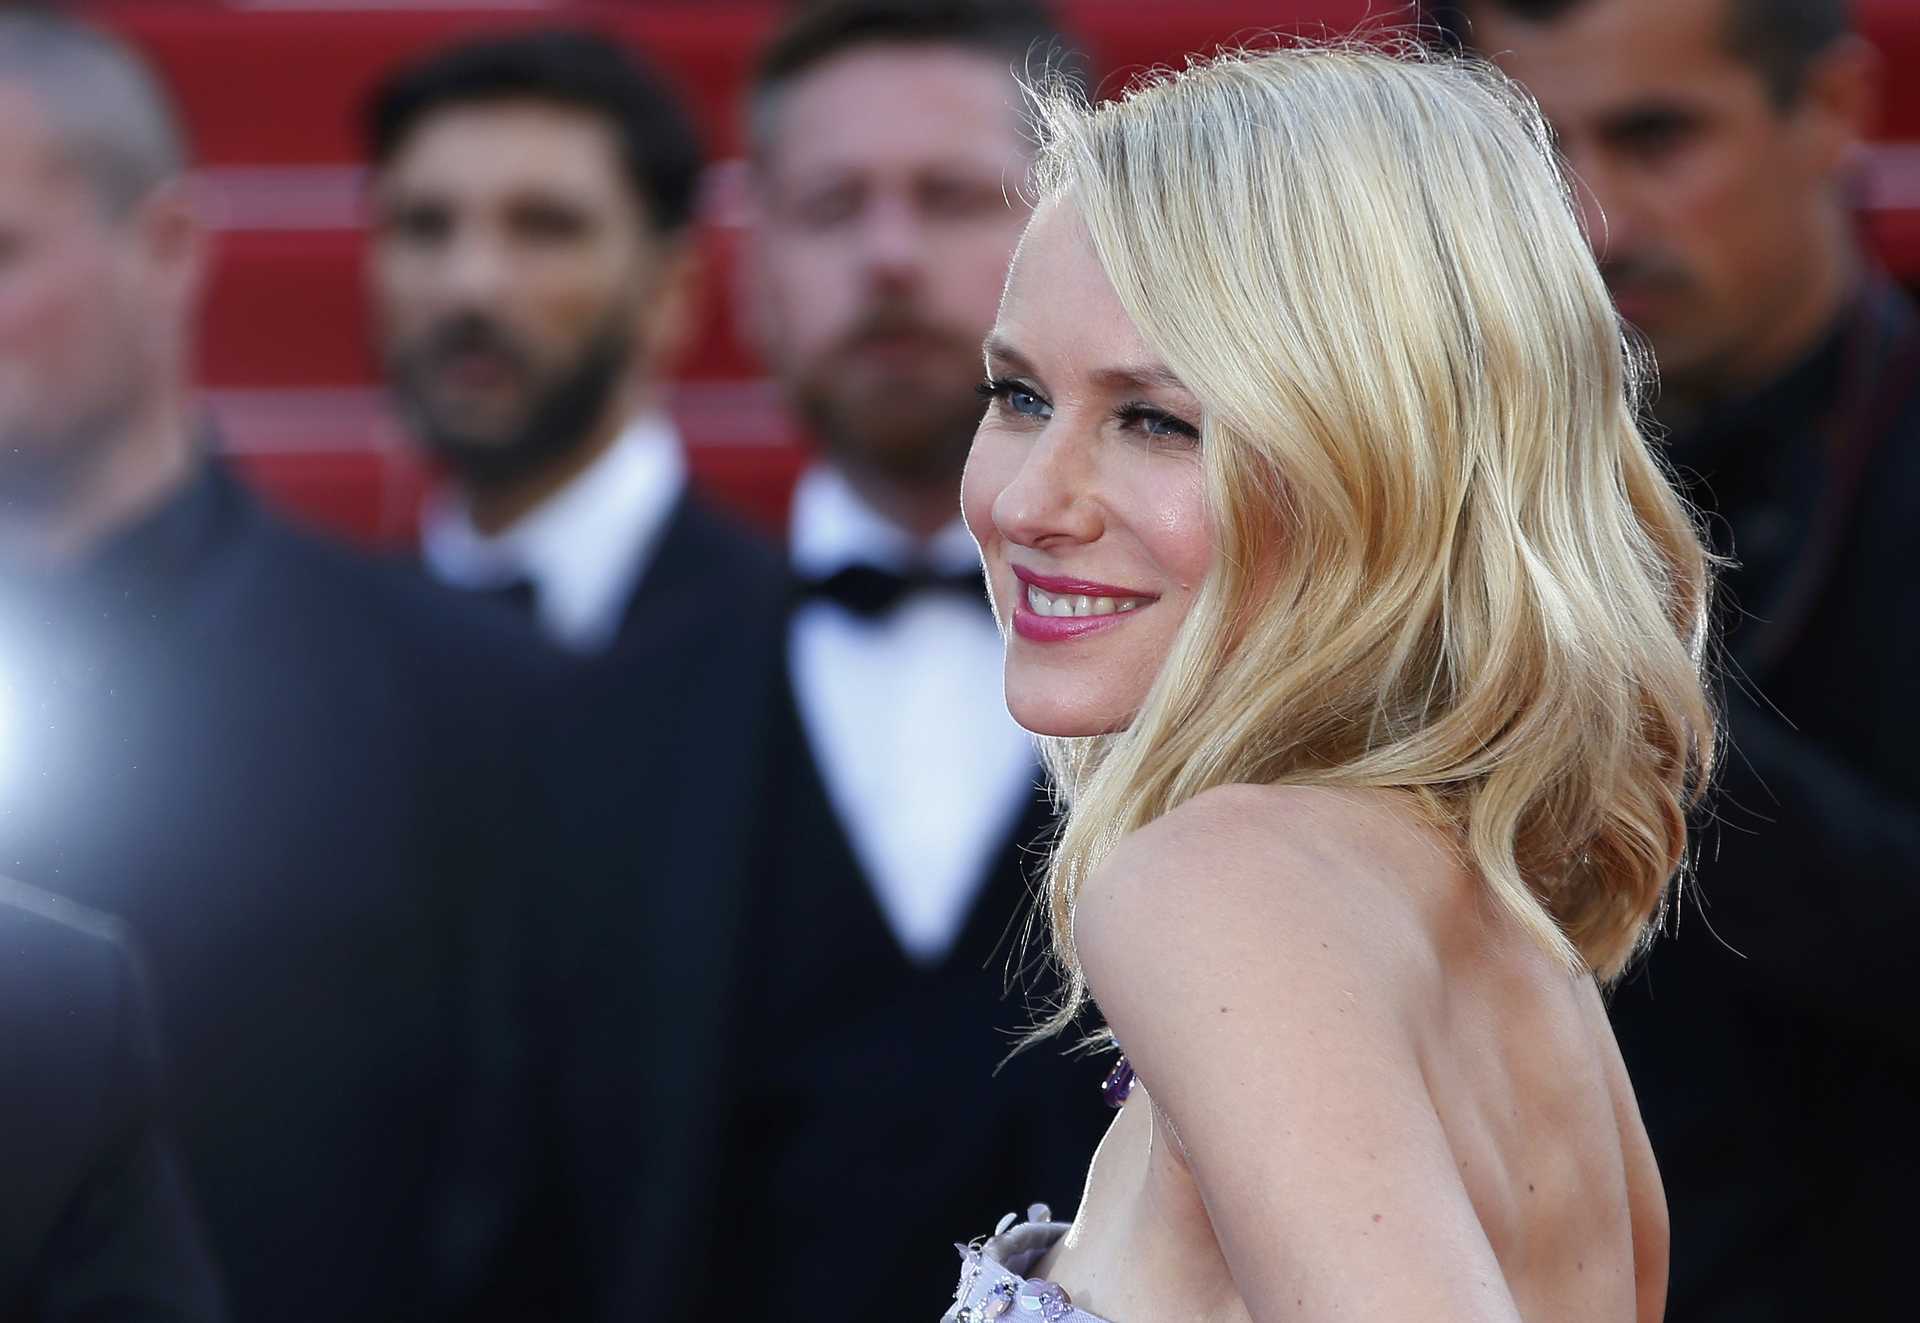 Actress Naomi Watts poses on the red carpet as she arrives for the opening ceremony and the screening of the film “Cafe Society” out of competition during the 69th Cannes Film Festival in Cannes